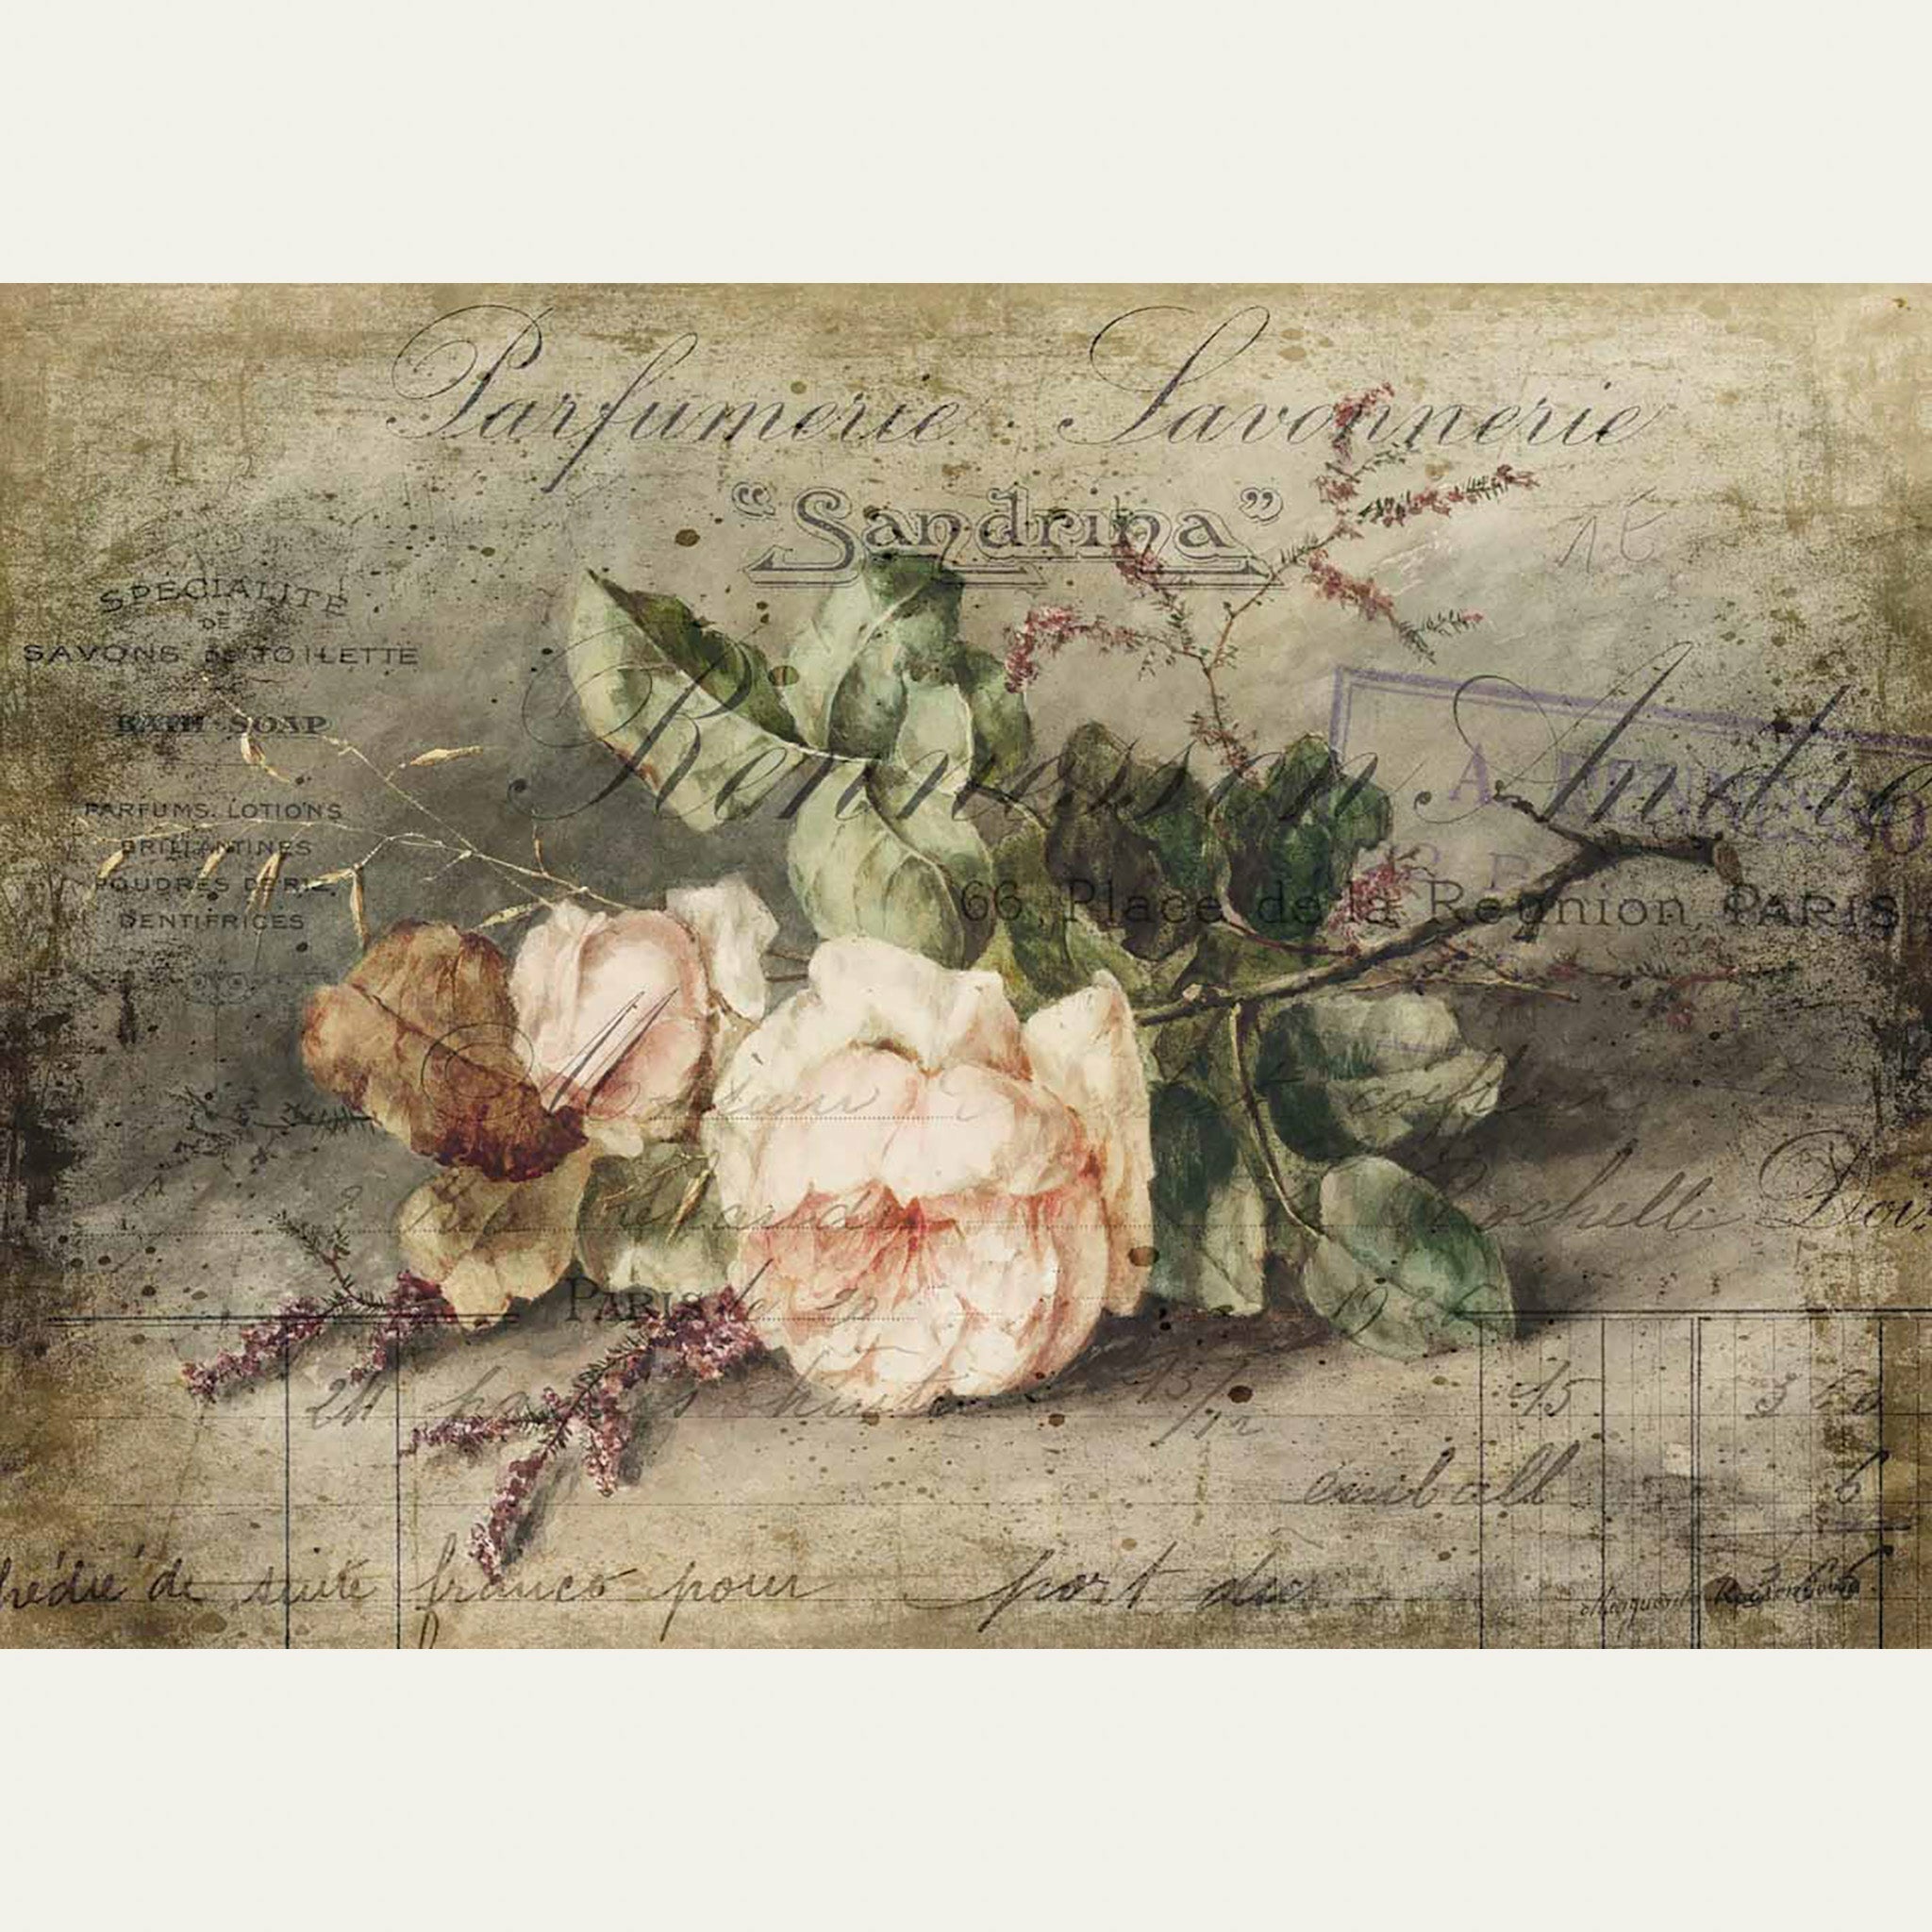 A2 rice paper design of vintage parchment with pink roses on a table. White borders are on the top and bottom.